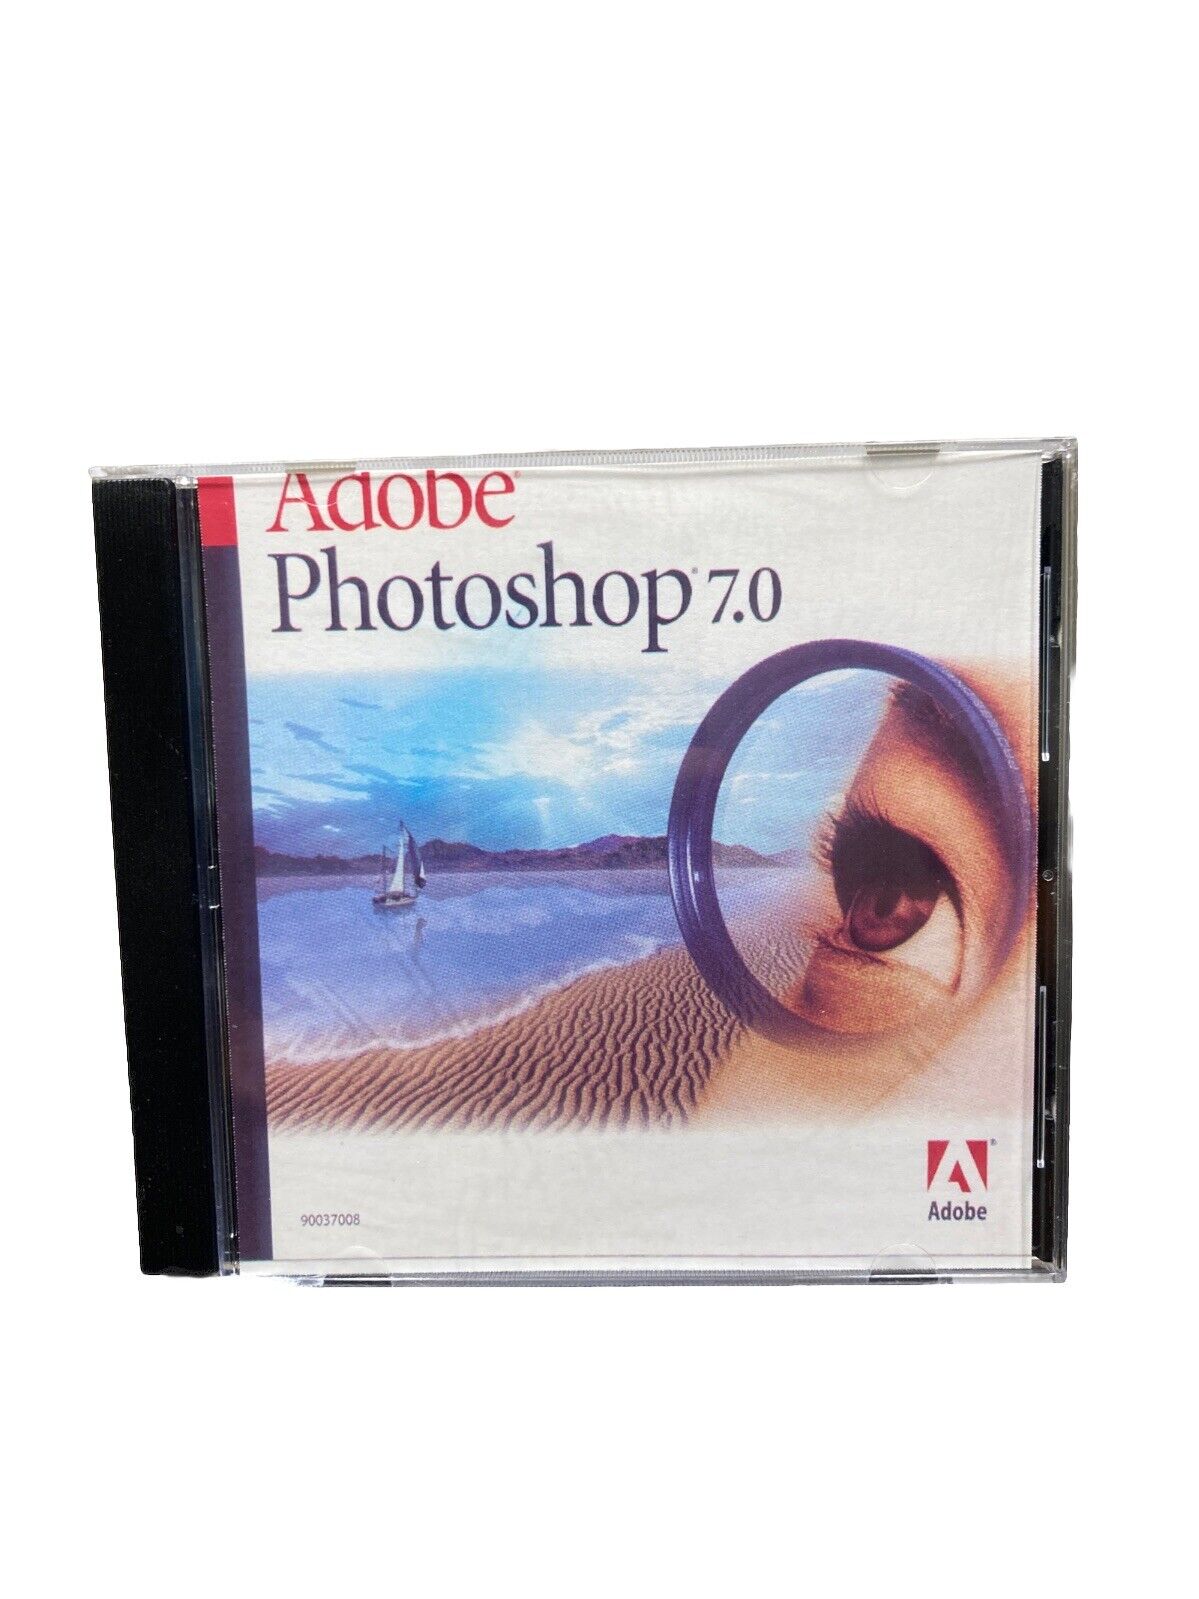 Adobe Photoshop 7.0 for Windows with Serial Number. Full Version